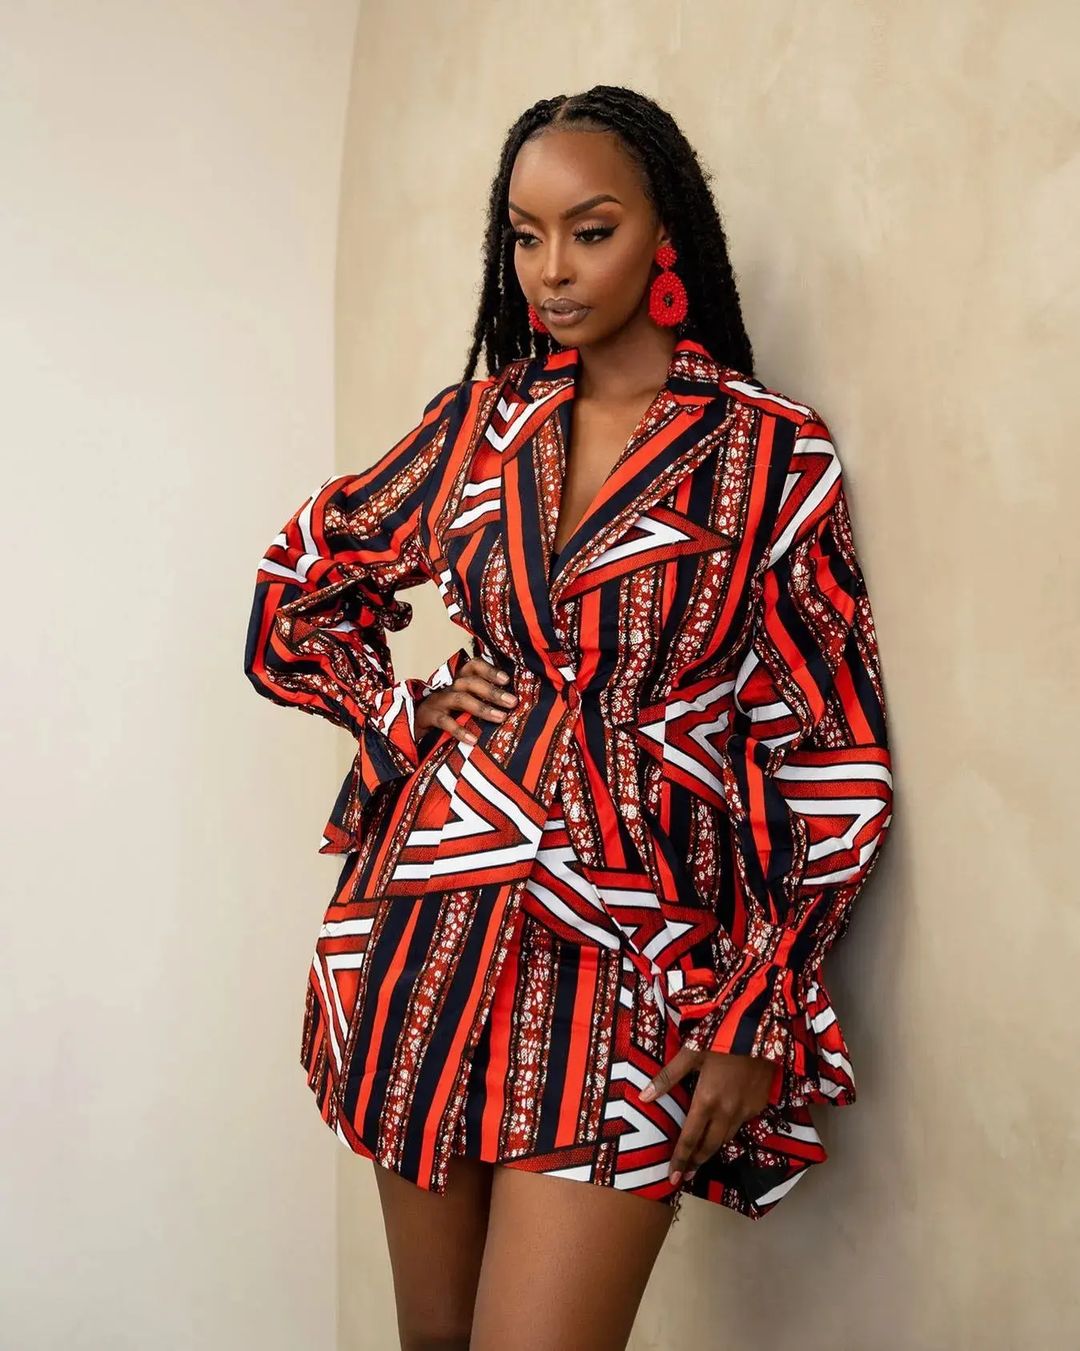 Beautiful Ankara Short Gown Styles To Rock To All Events - Fashion - Nigeria